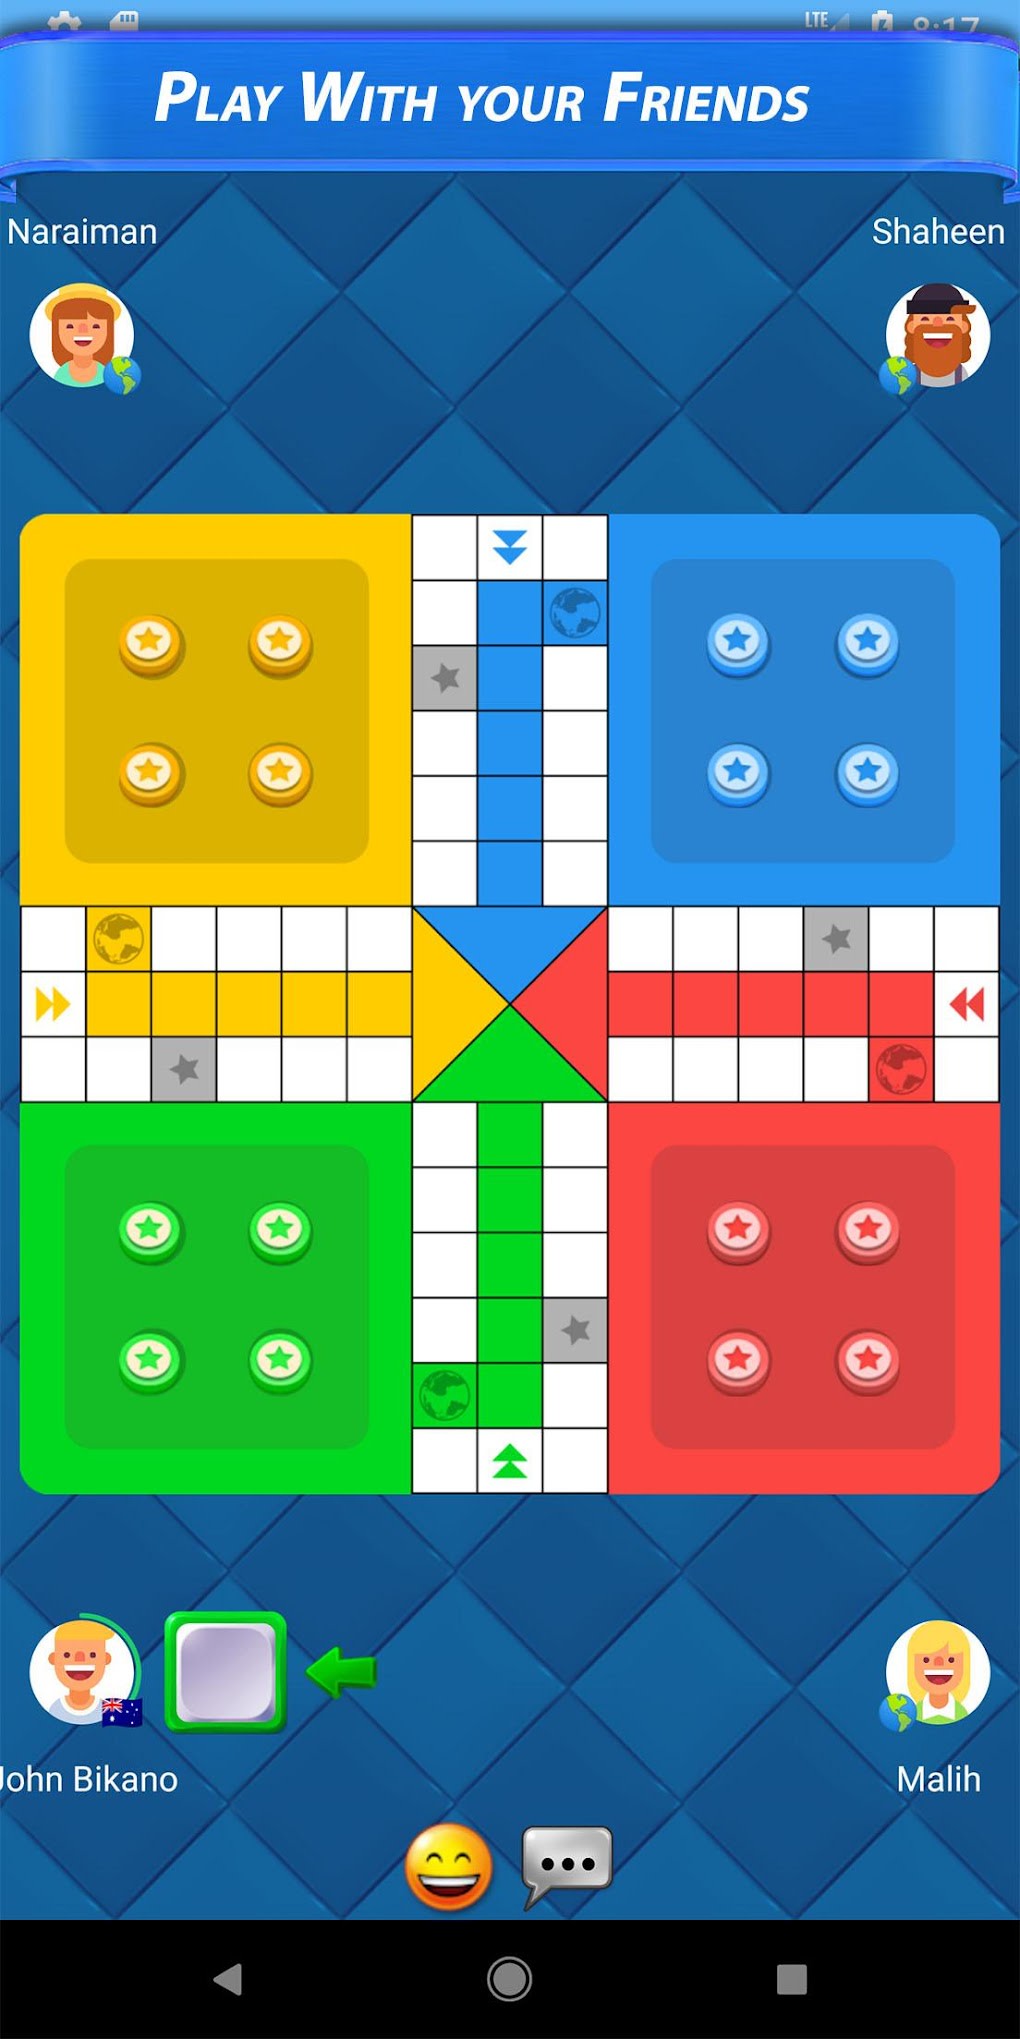 Chotta Ludo Play the Game Online for FREE on Jagran Play